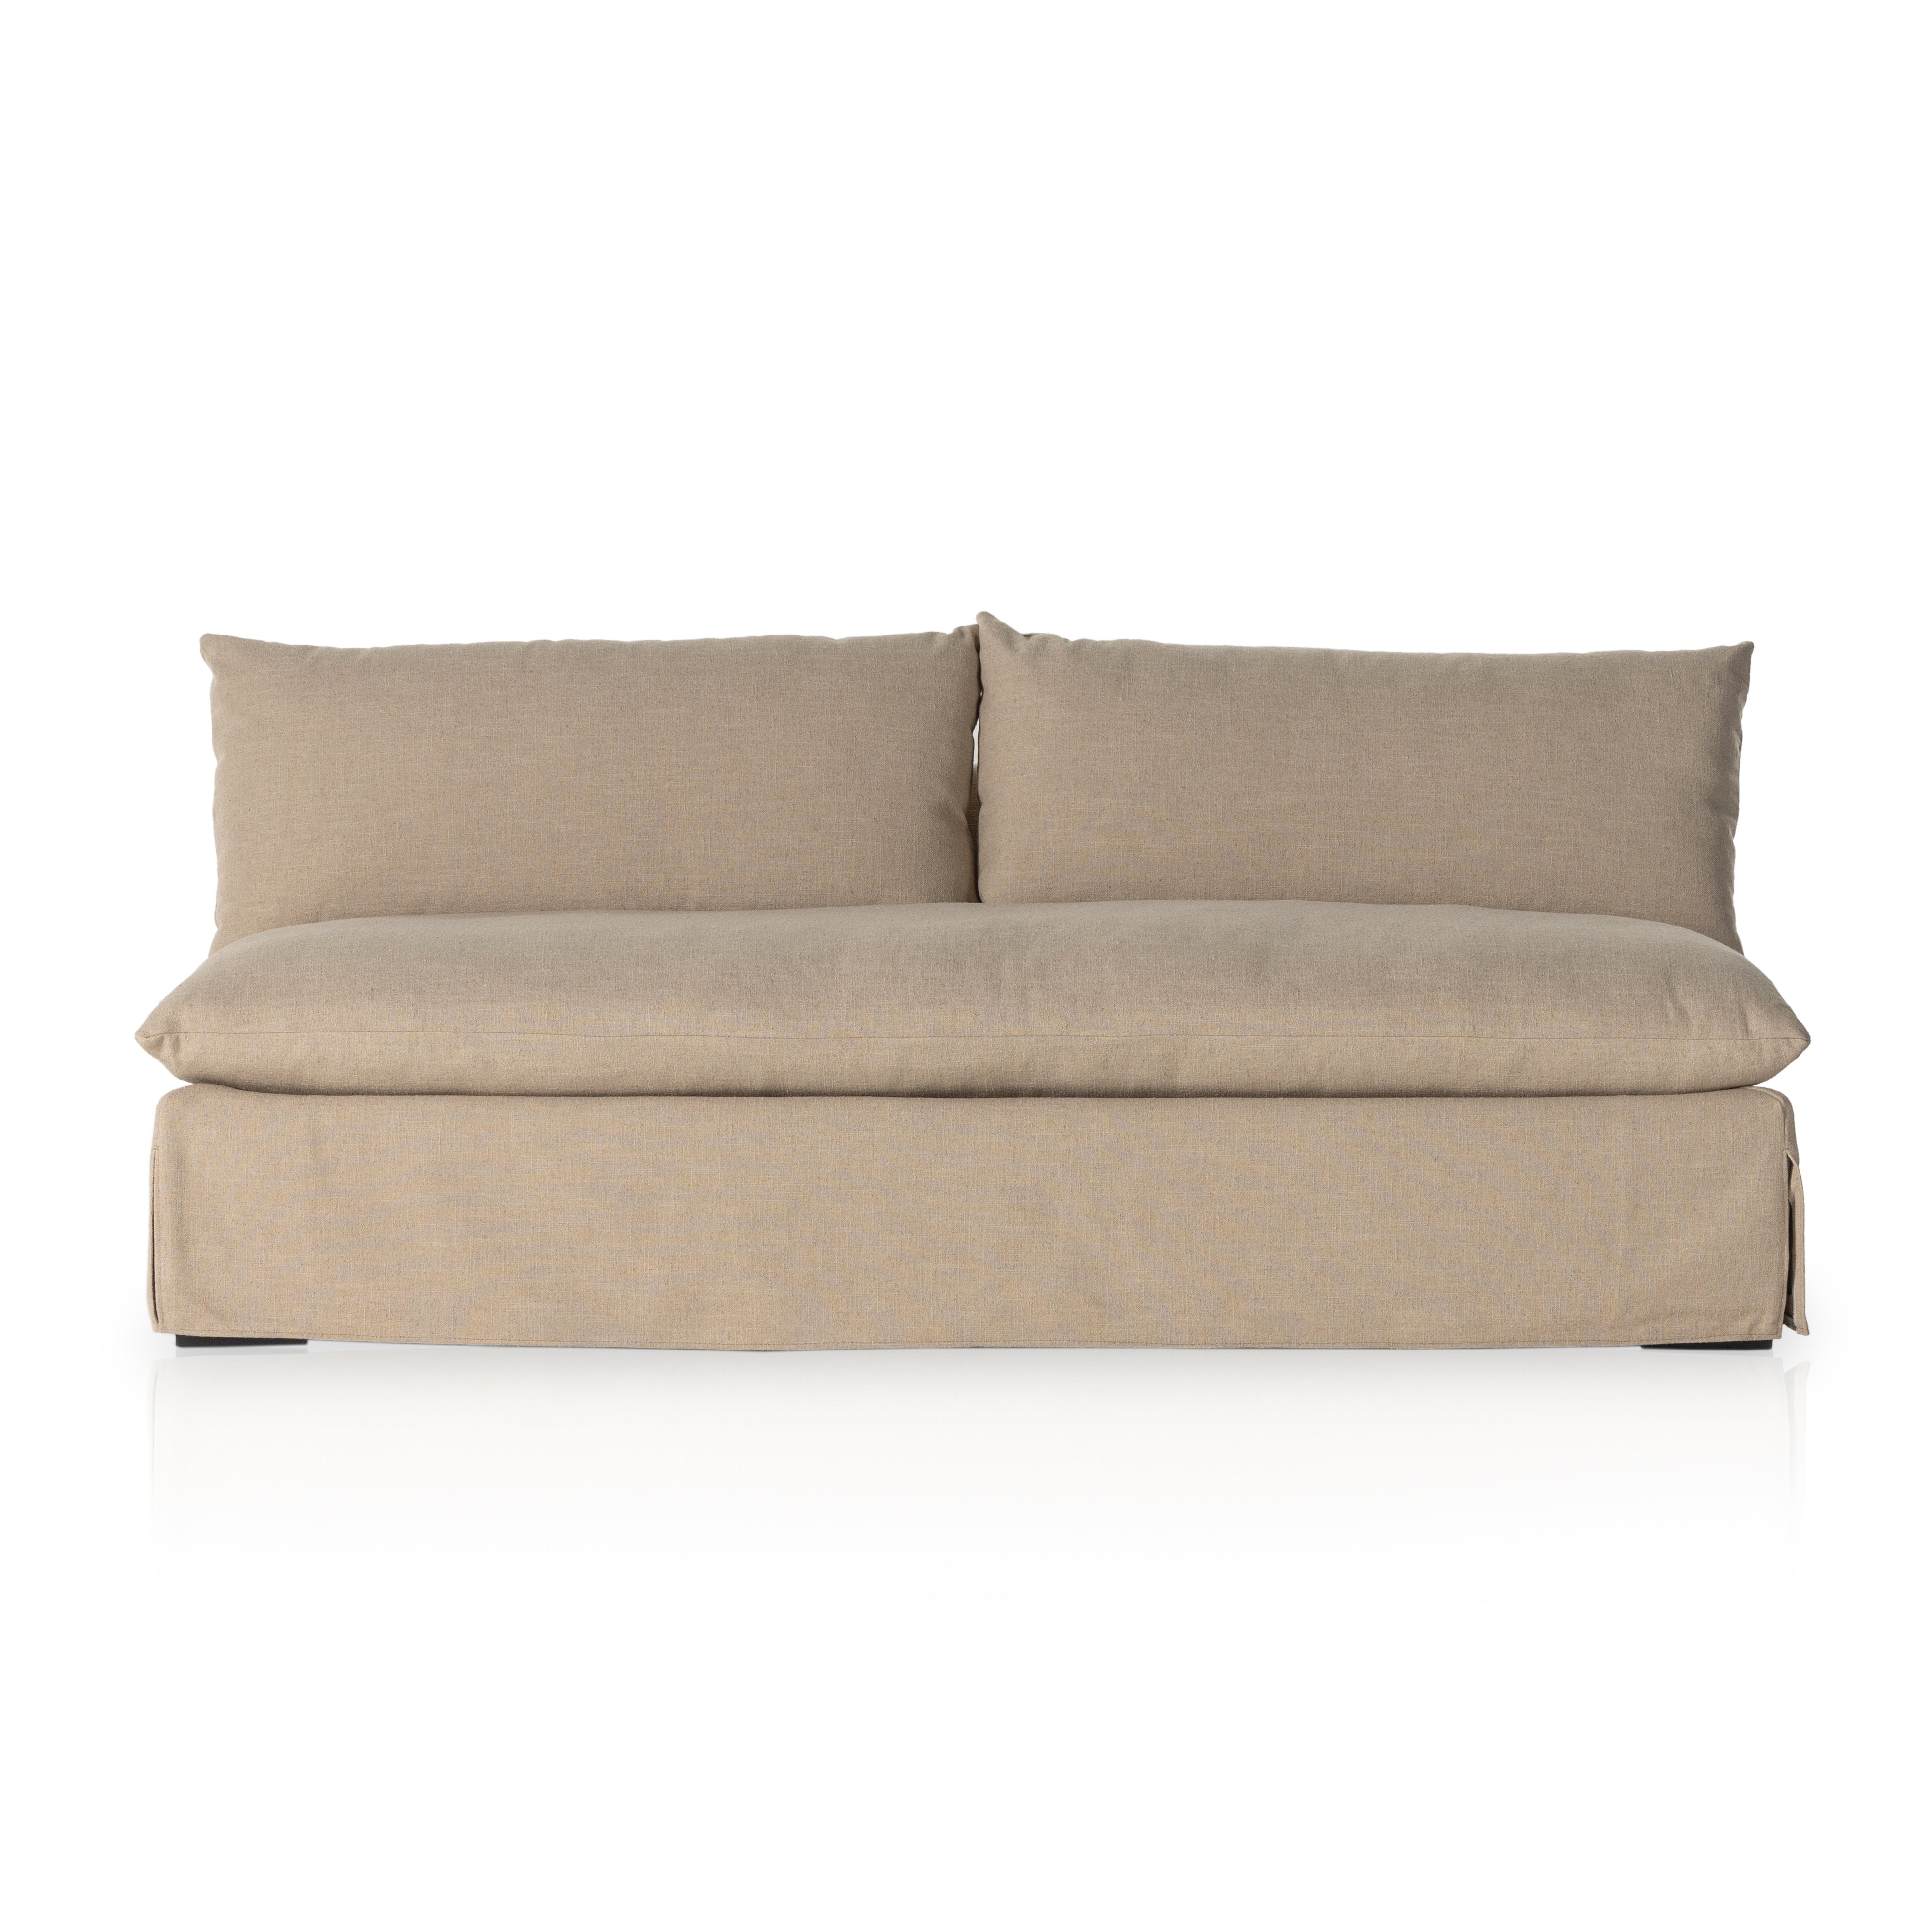 Build Your Own: Grant Slipcover Sectional